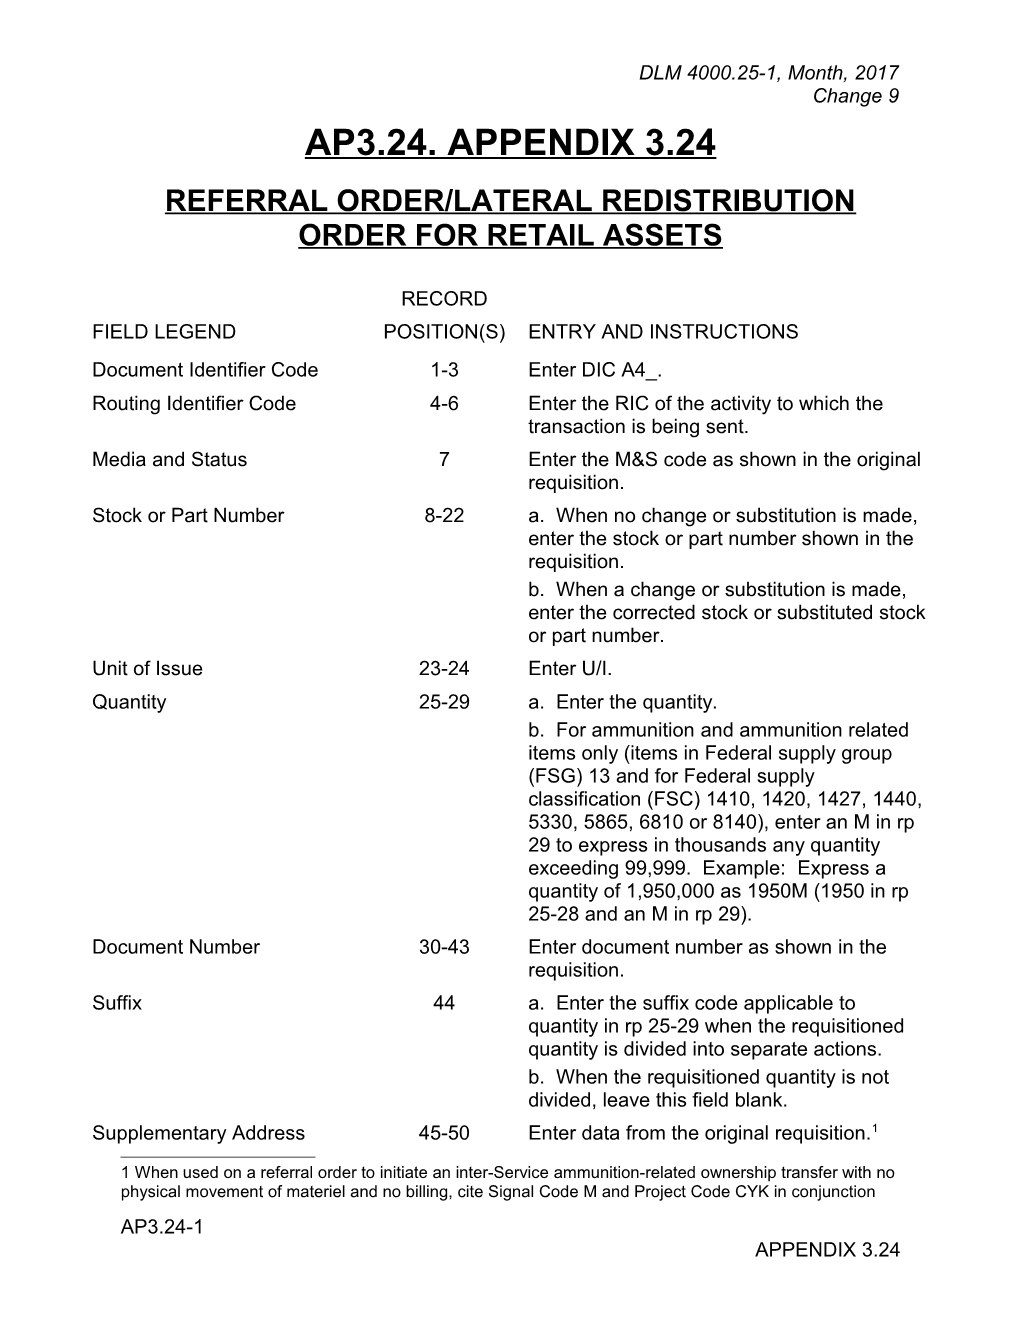 Appendix 3.24 - Referral Order/Lateral Redistribution Order Retail Assets